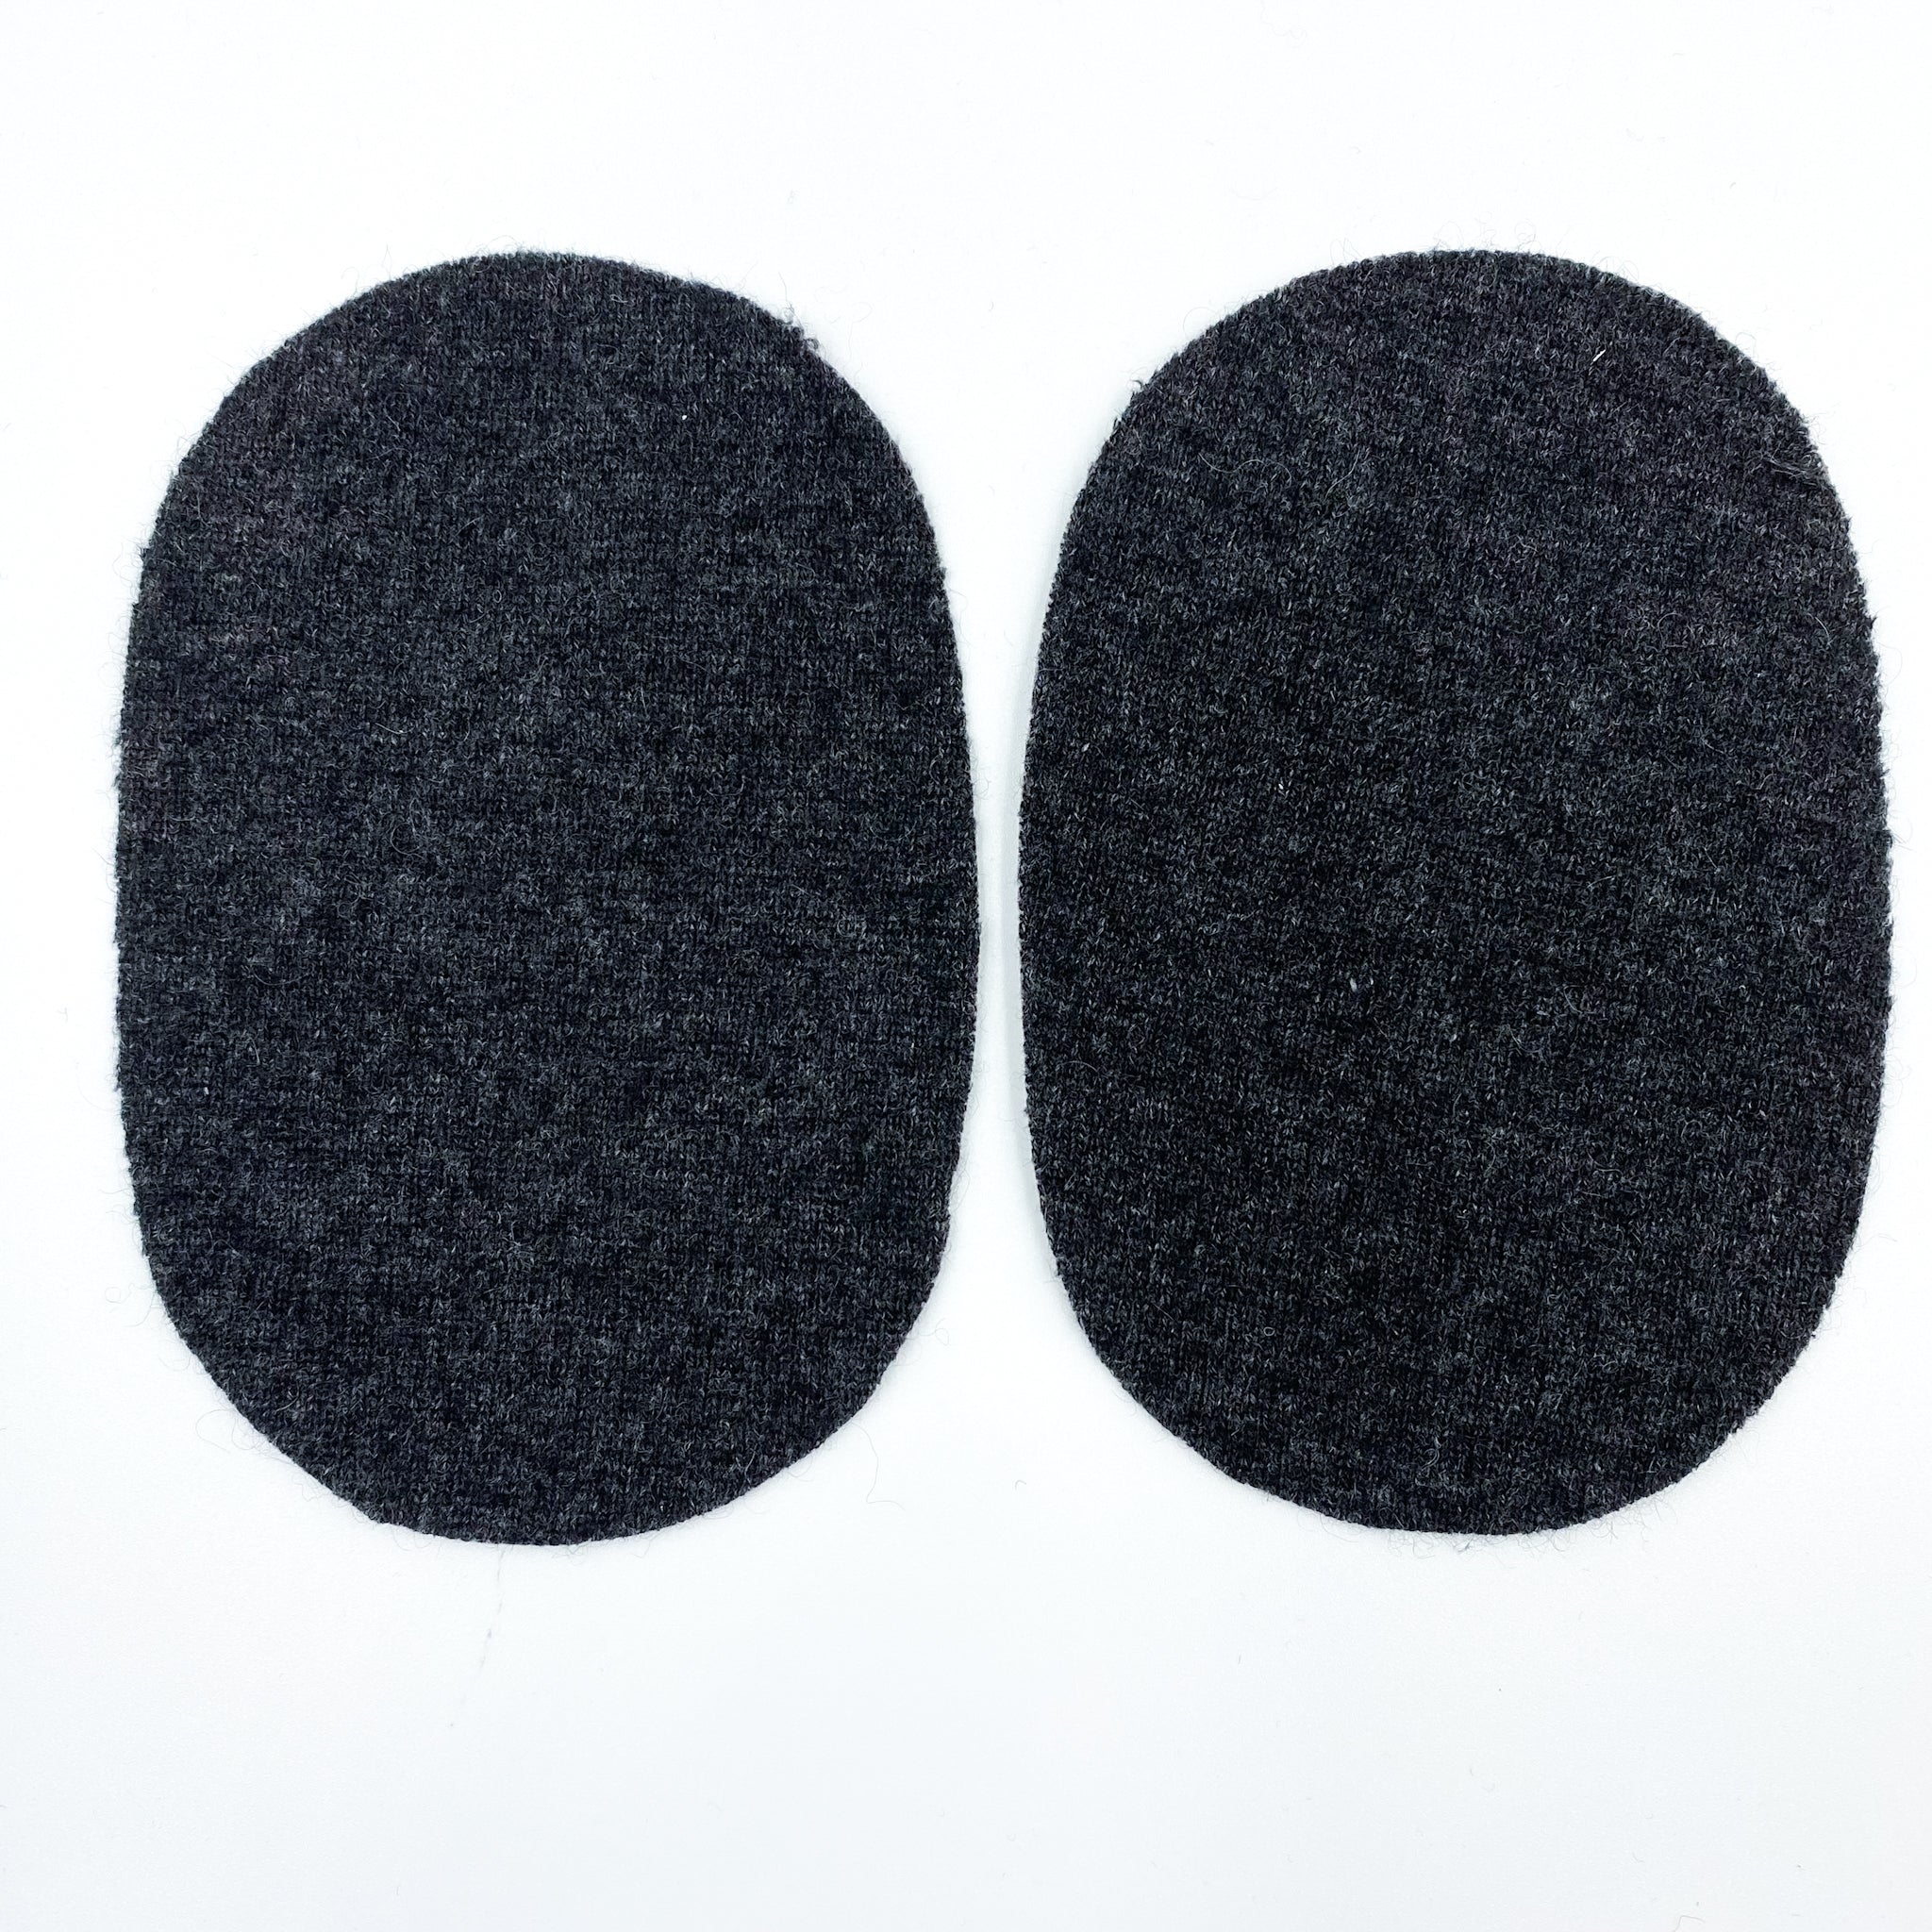 Large Charcoal Grey Elbow Patches - Machine Use